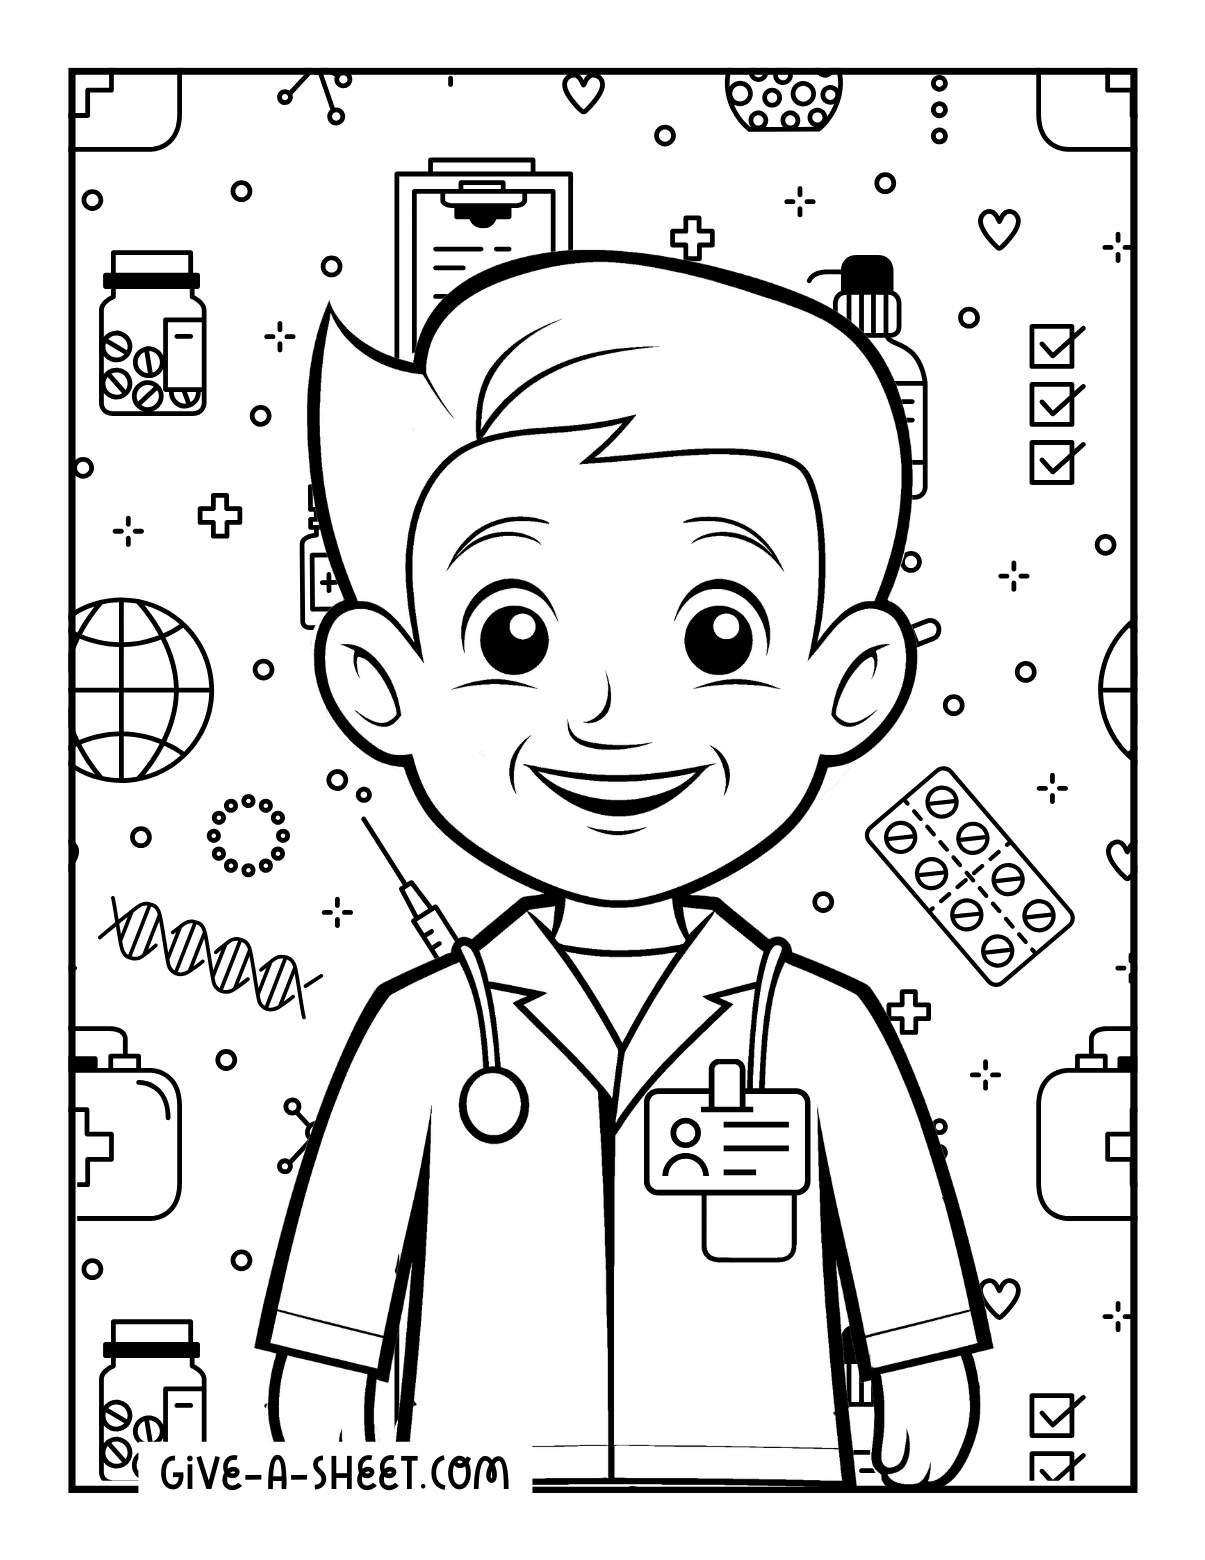 Male nurse coloring page on the medical field.